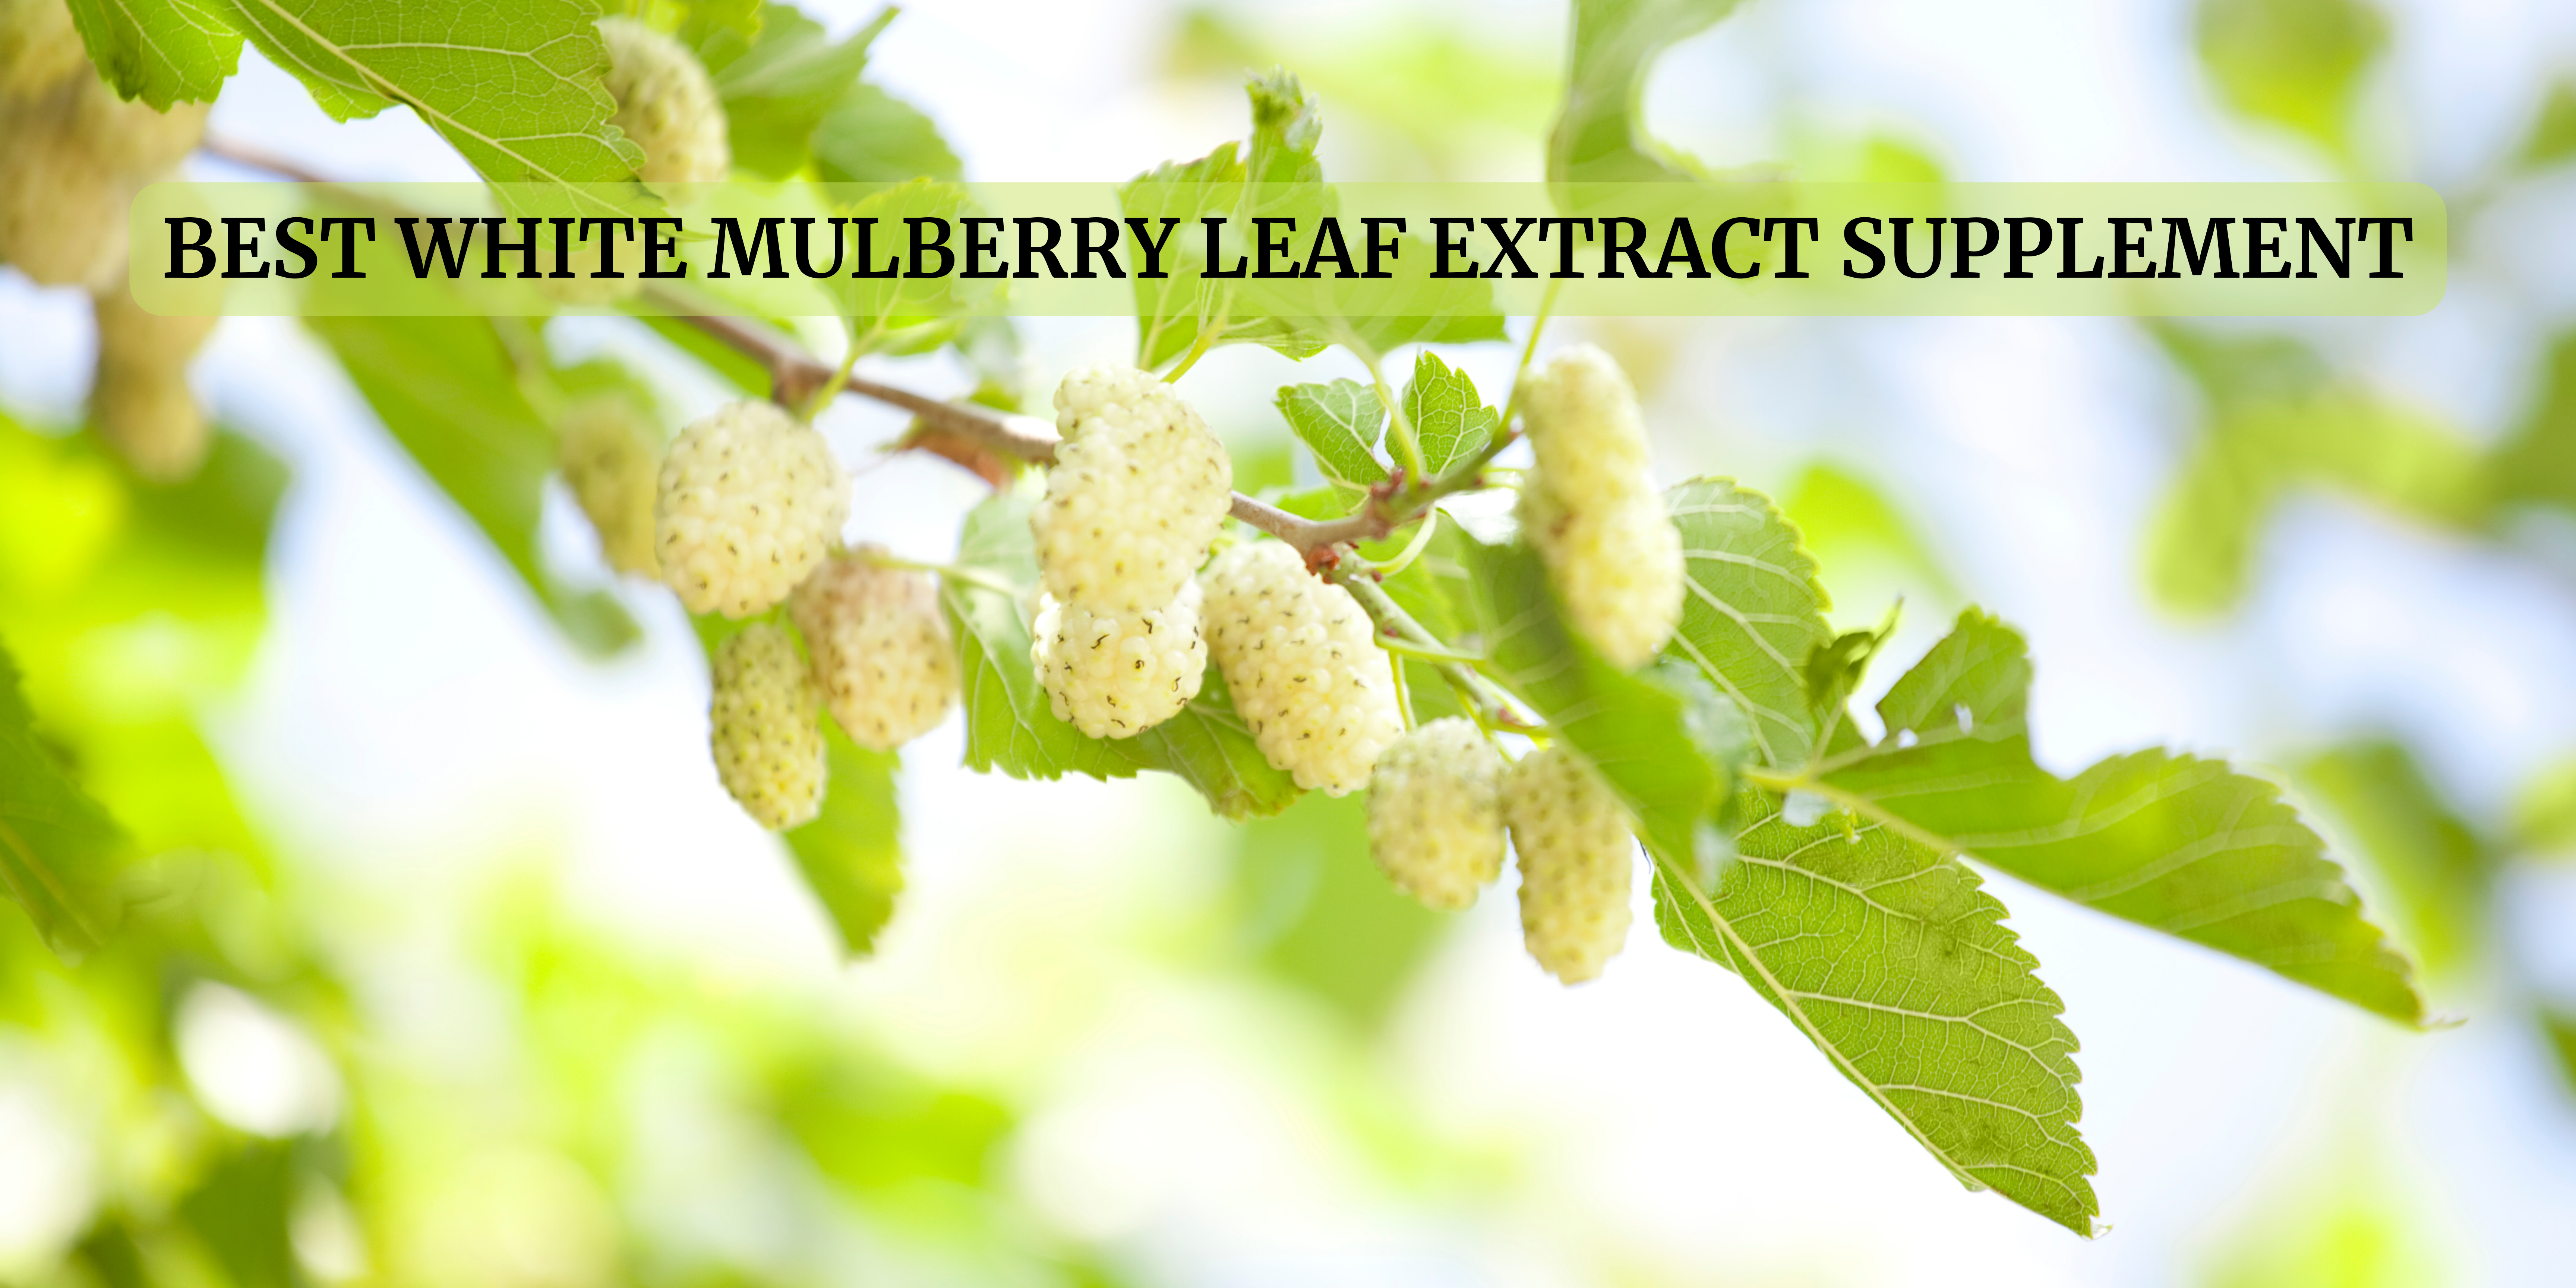 white mulberry leaf extract supplement in Spain